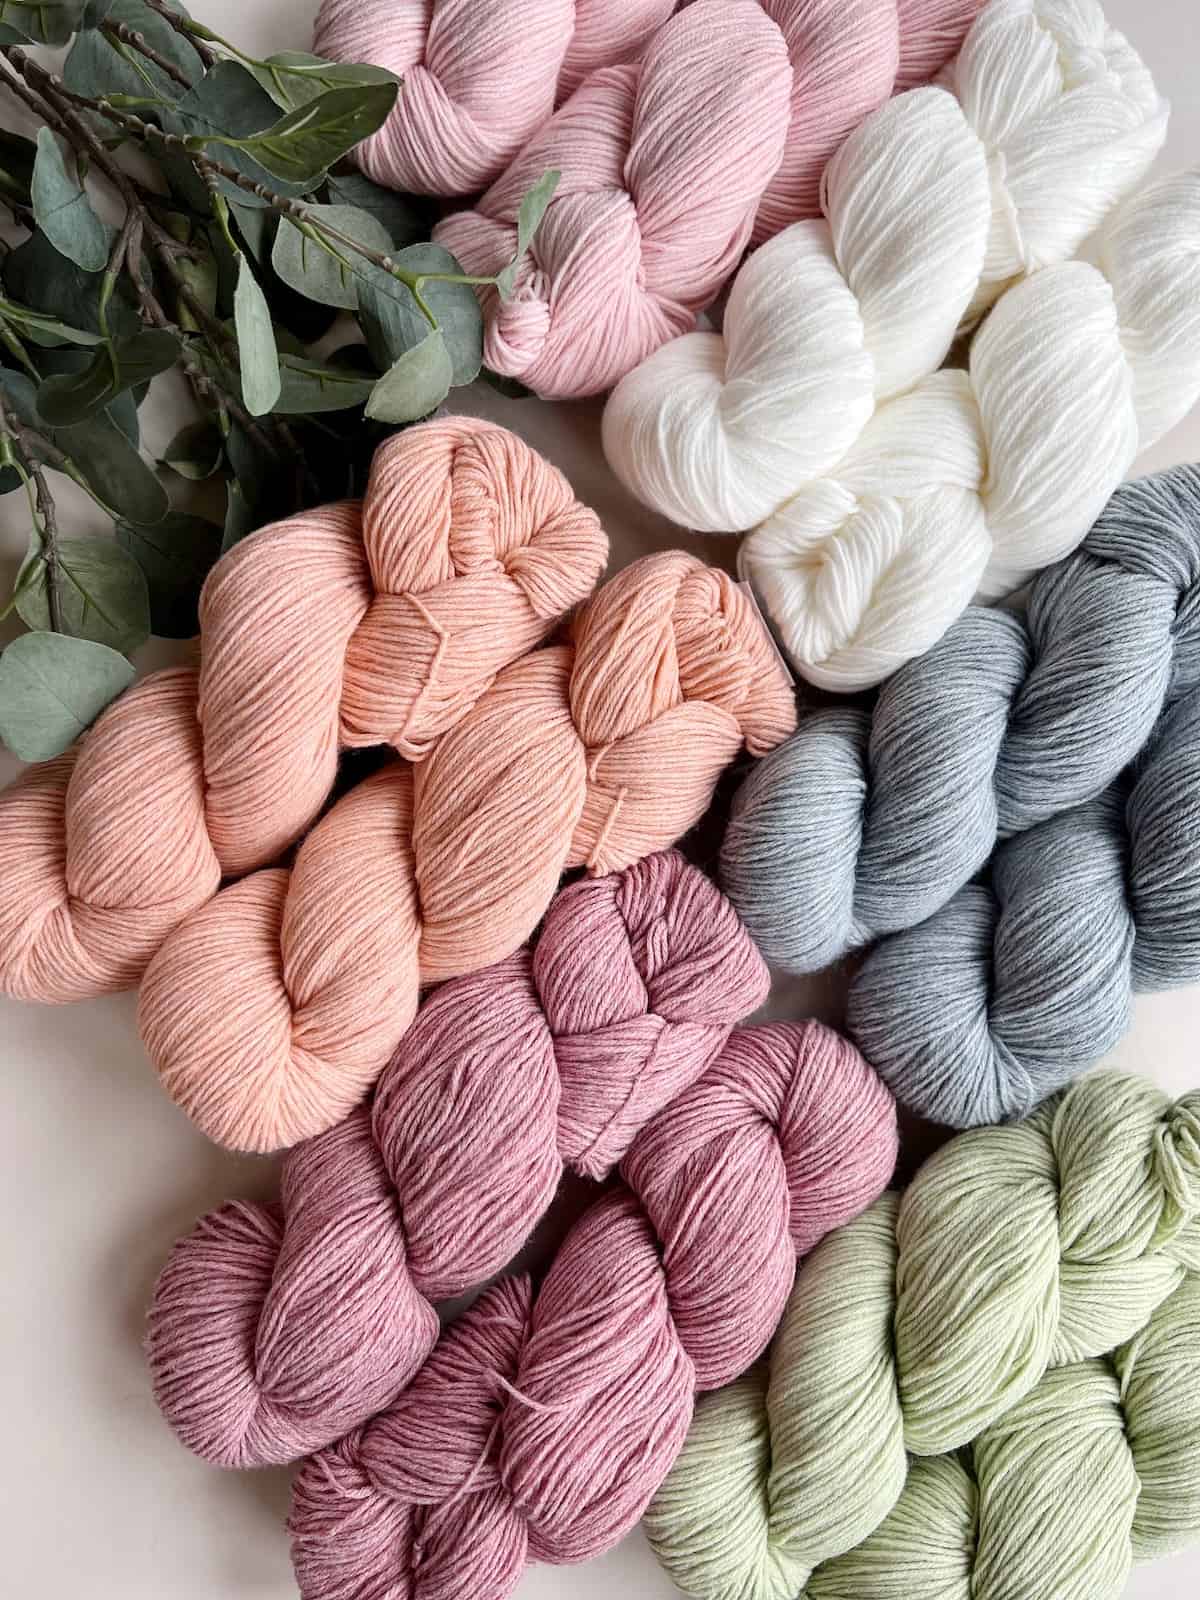 Hanks of pink, peach, blue, green and white yarn together on a table.